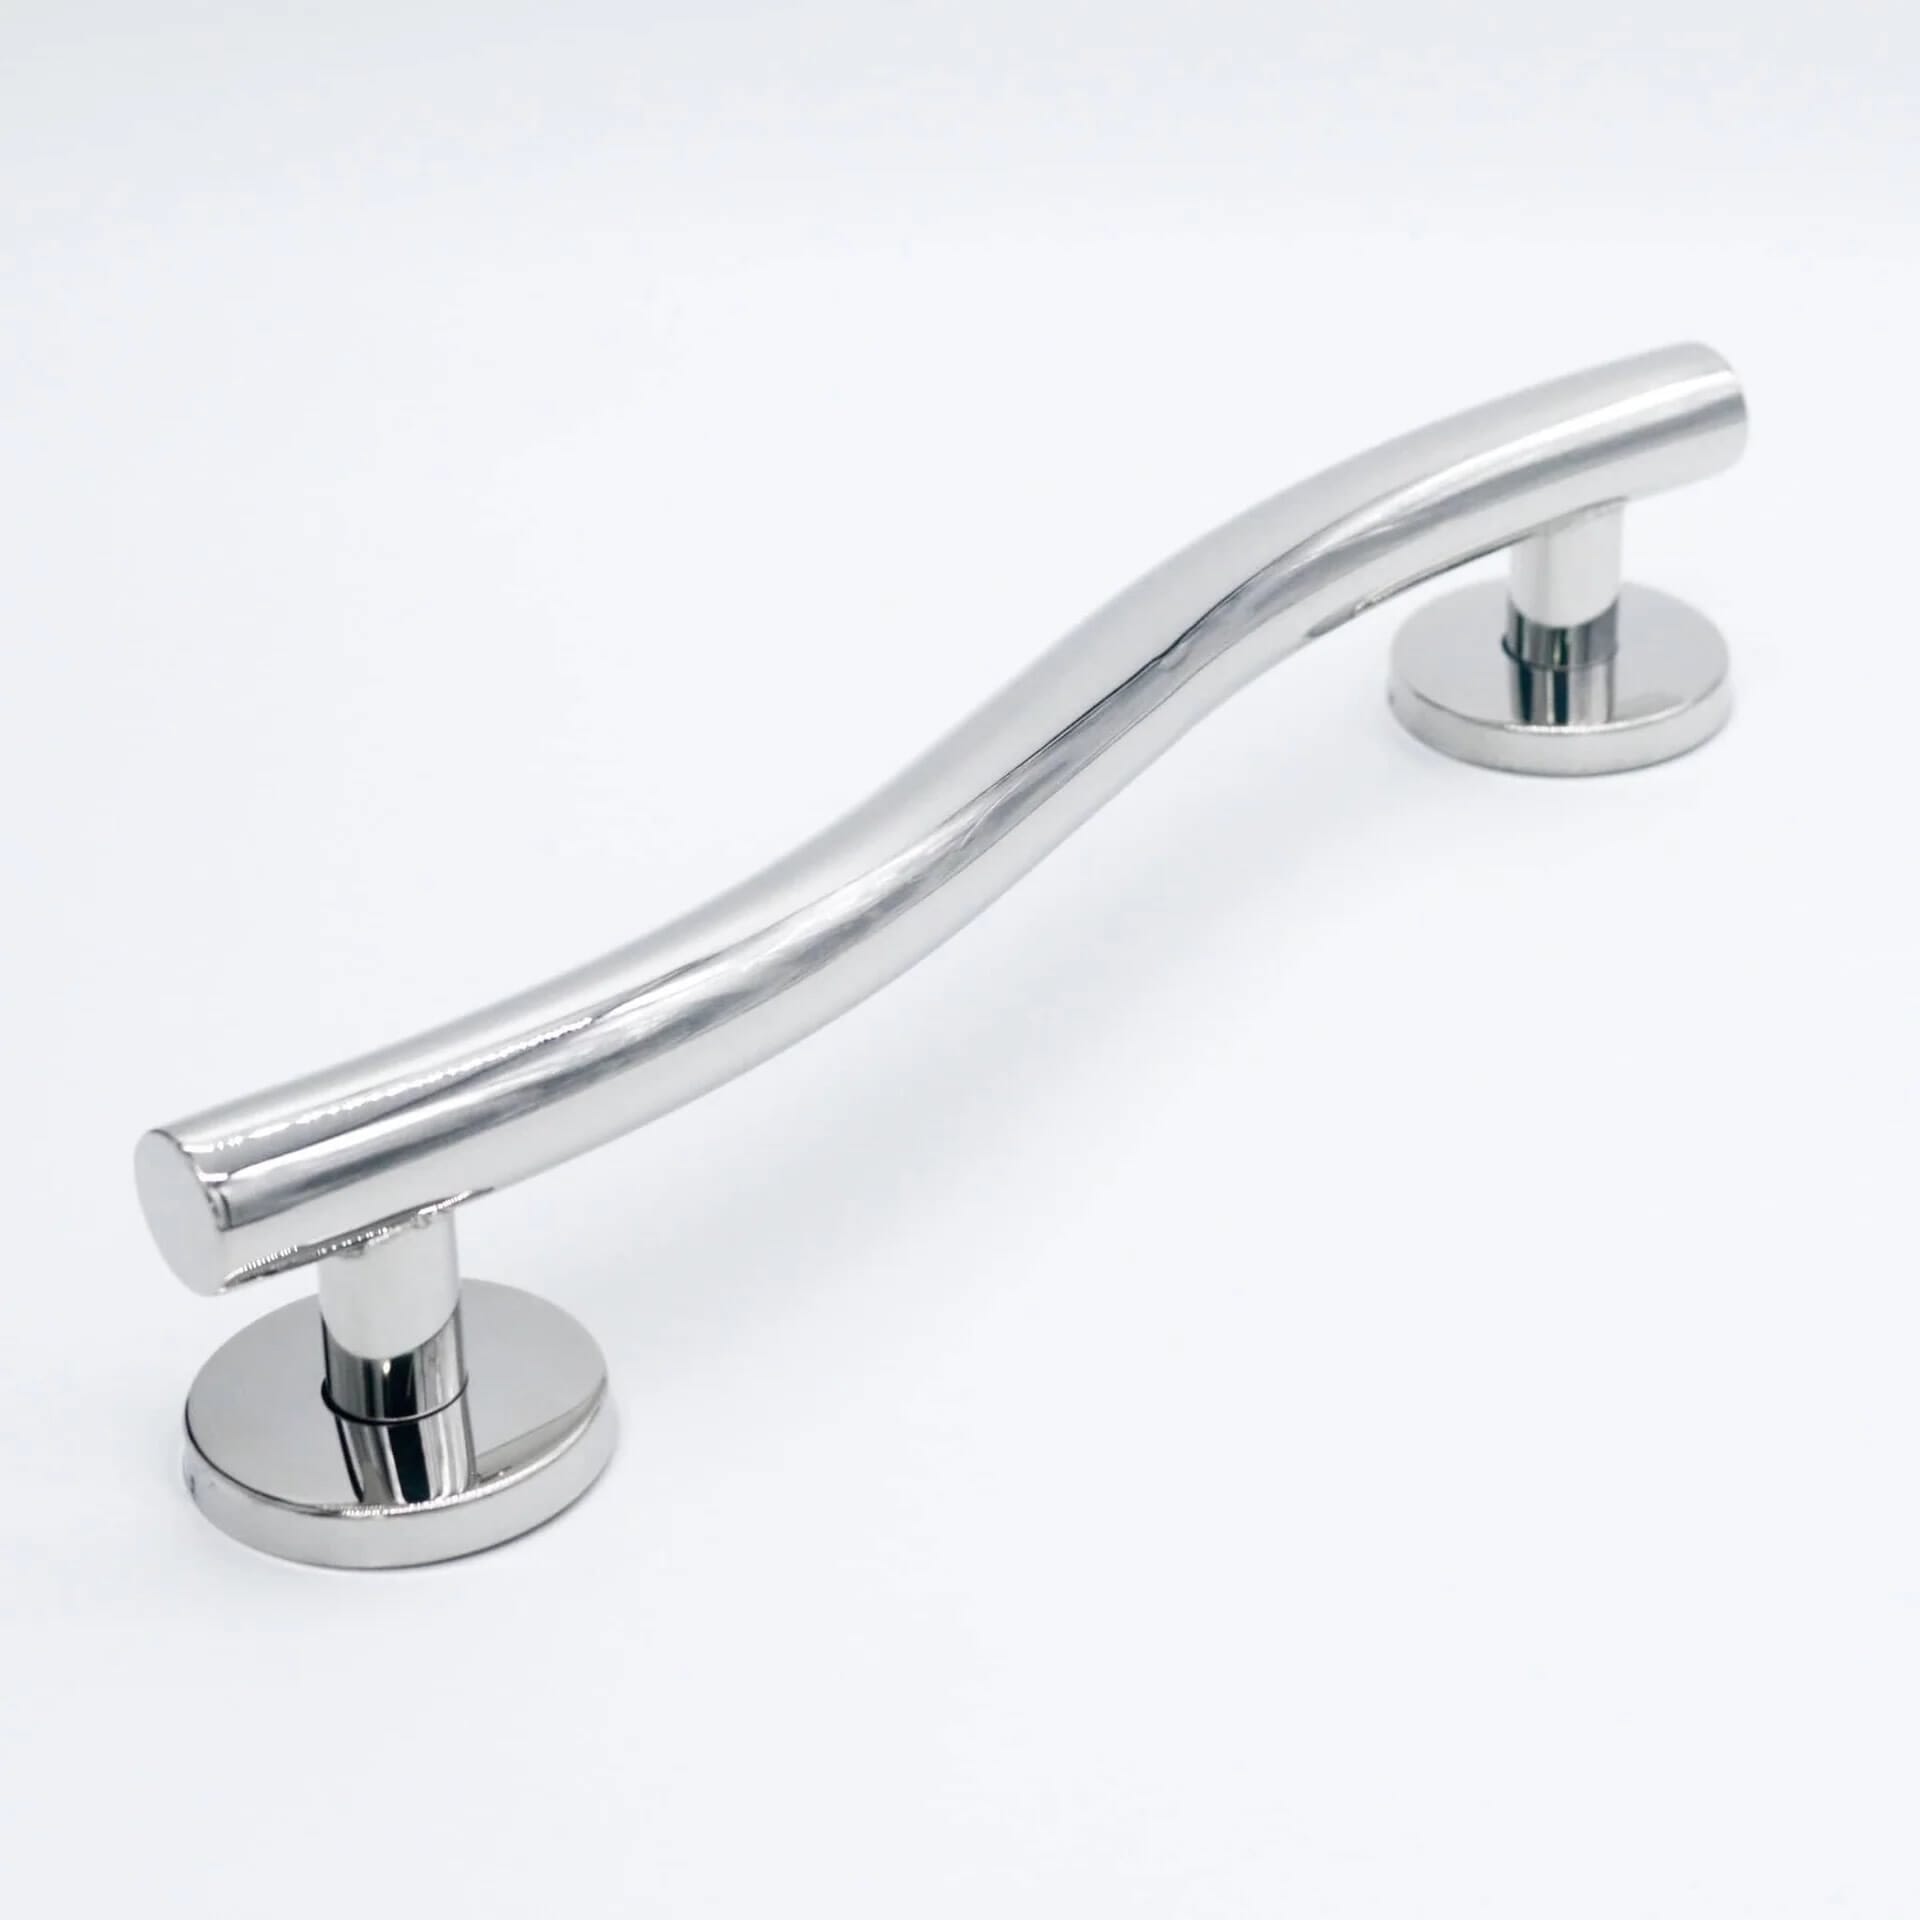 View Spa Stainless Steel Curved Grab Rail 12 inch information